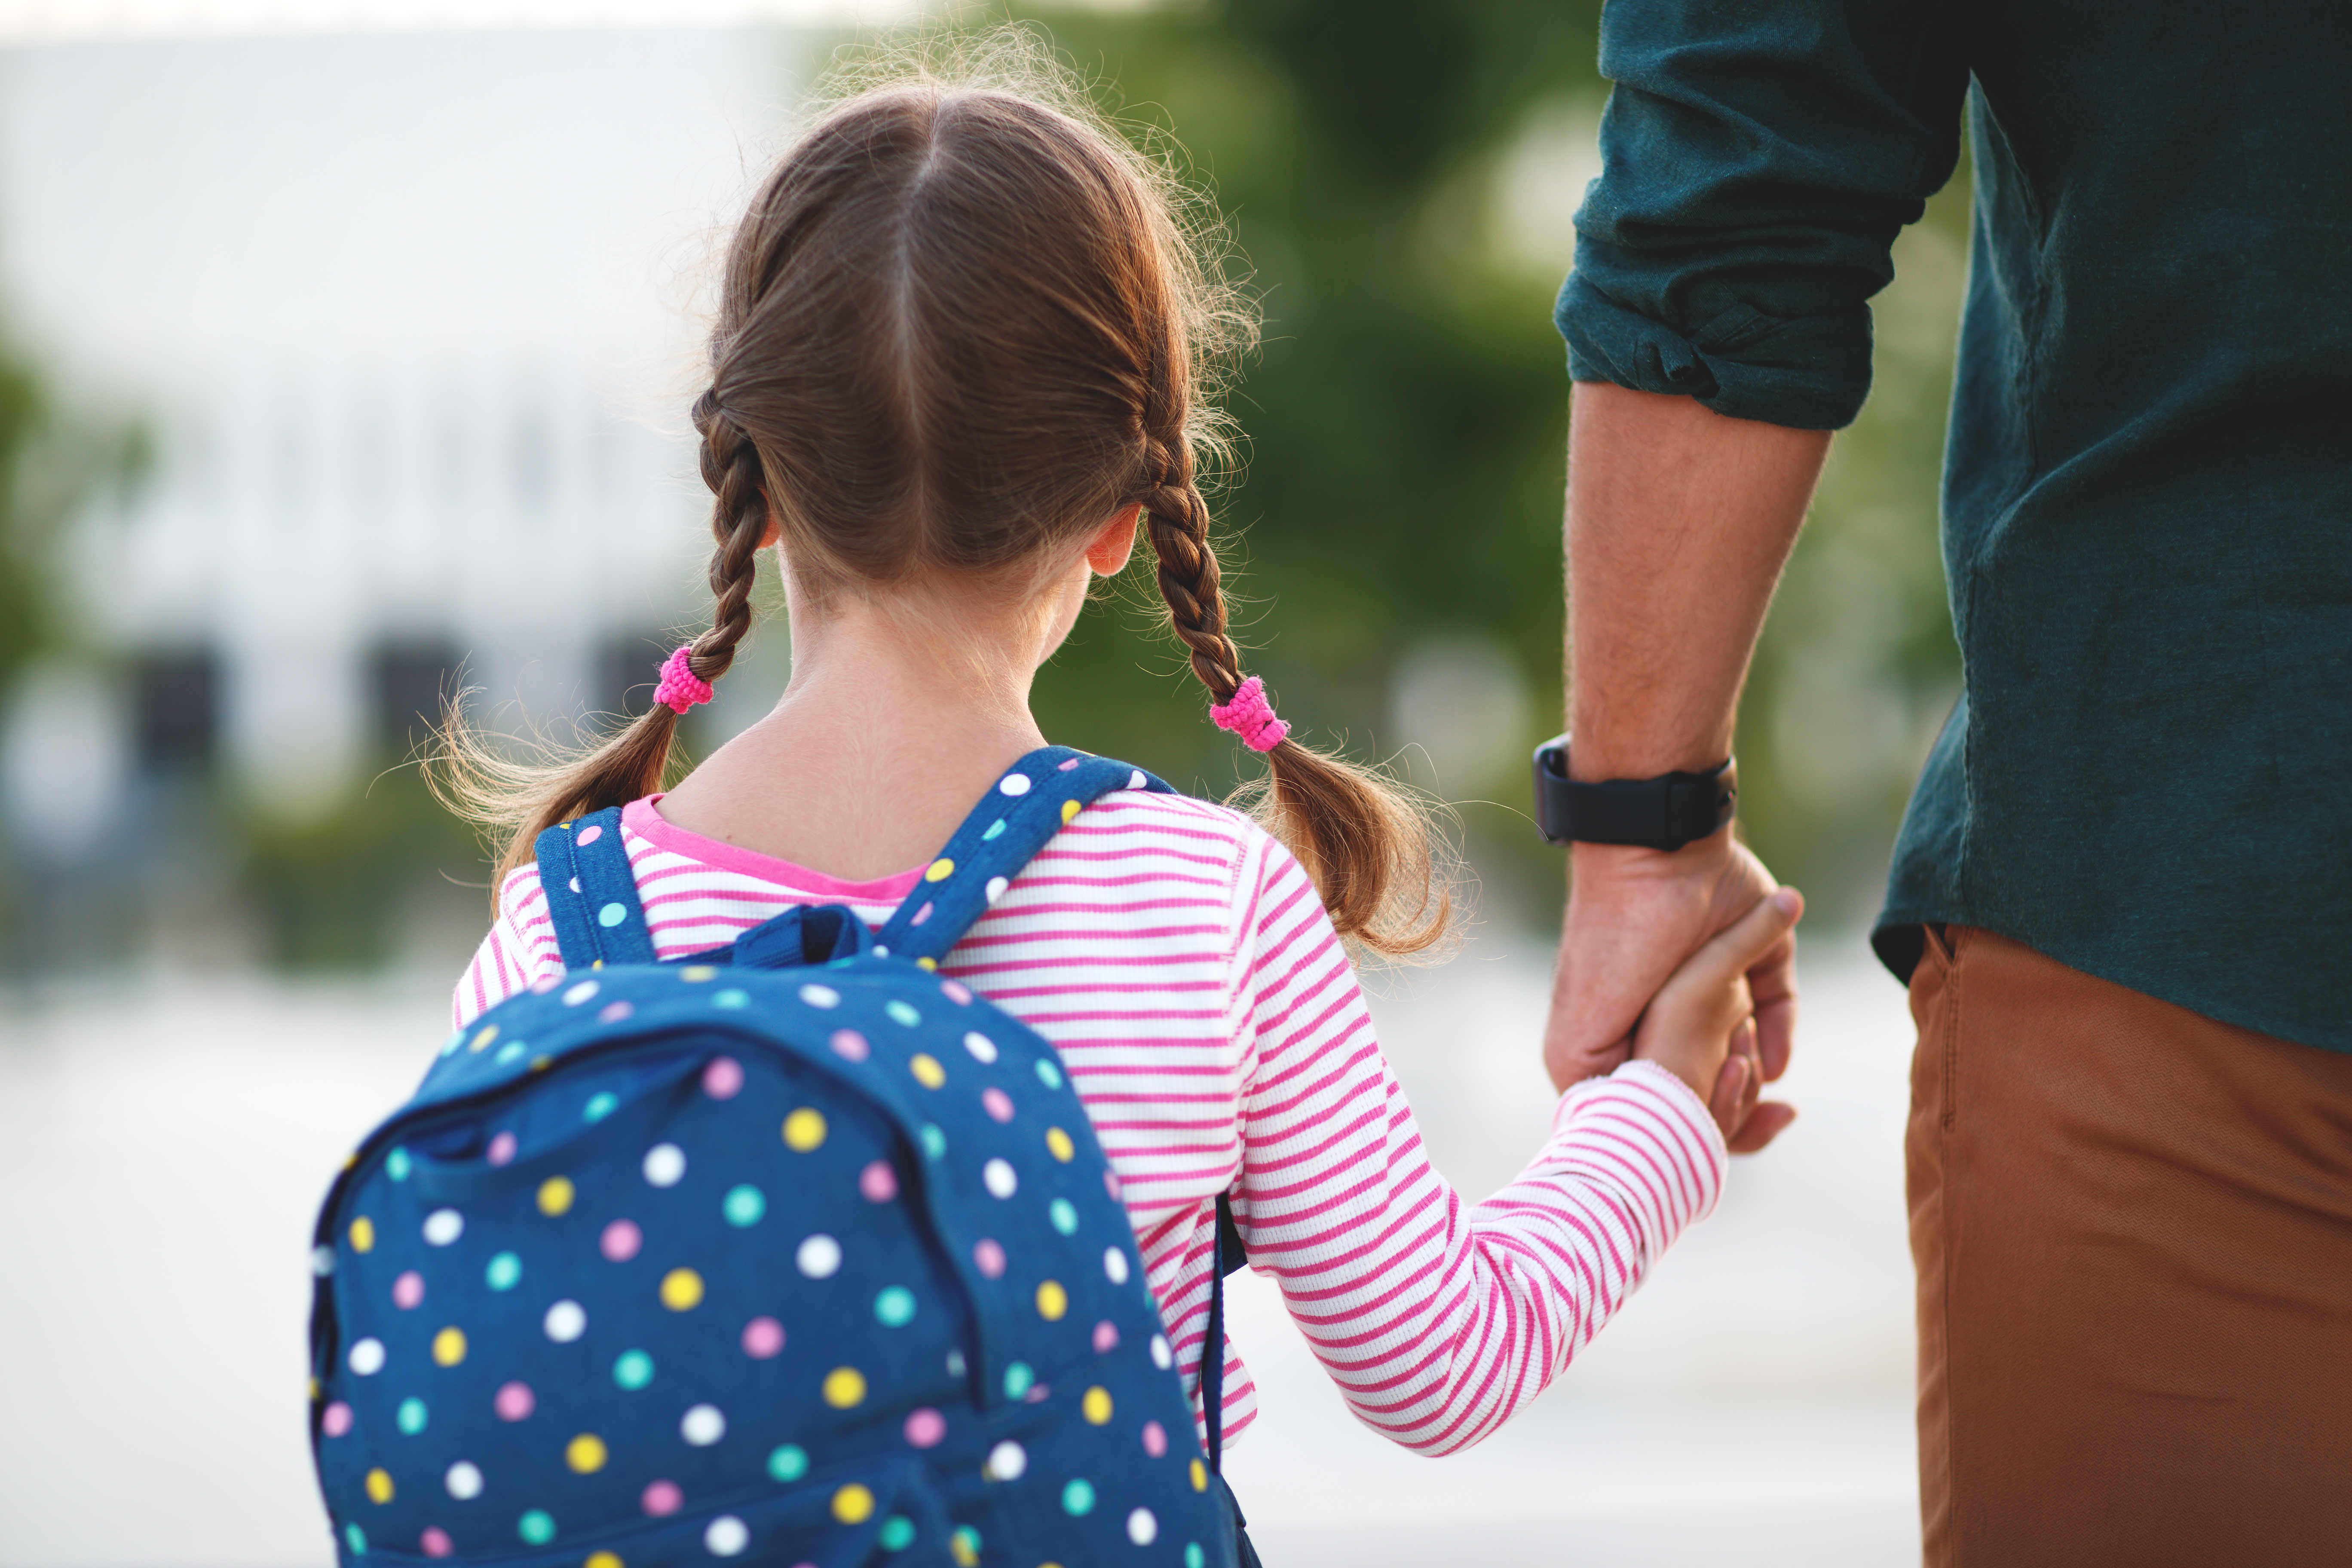 A little girl holds her father's hand while going to school | Source: Shutterstock